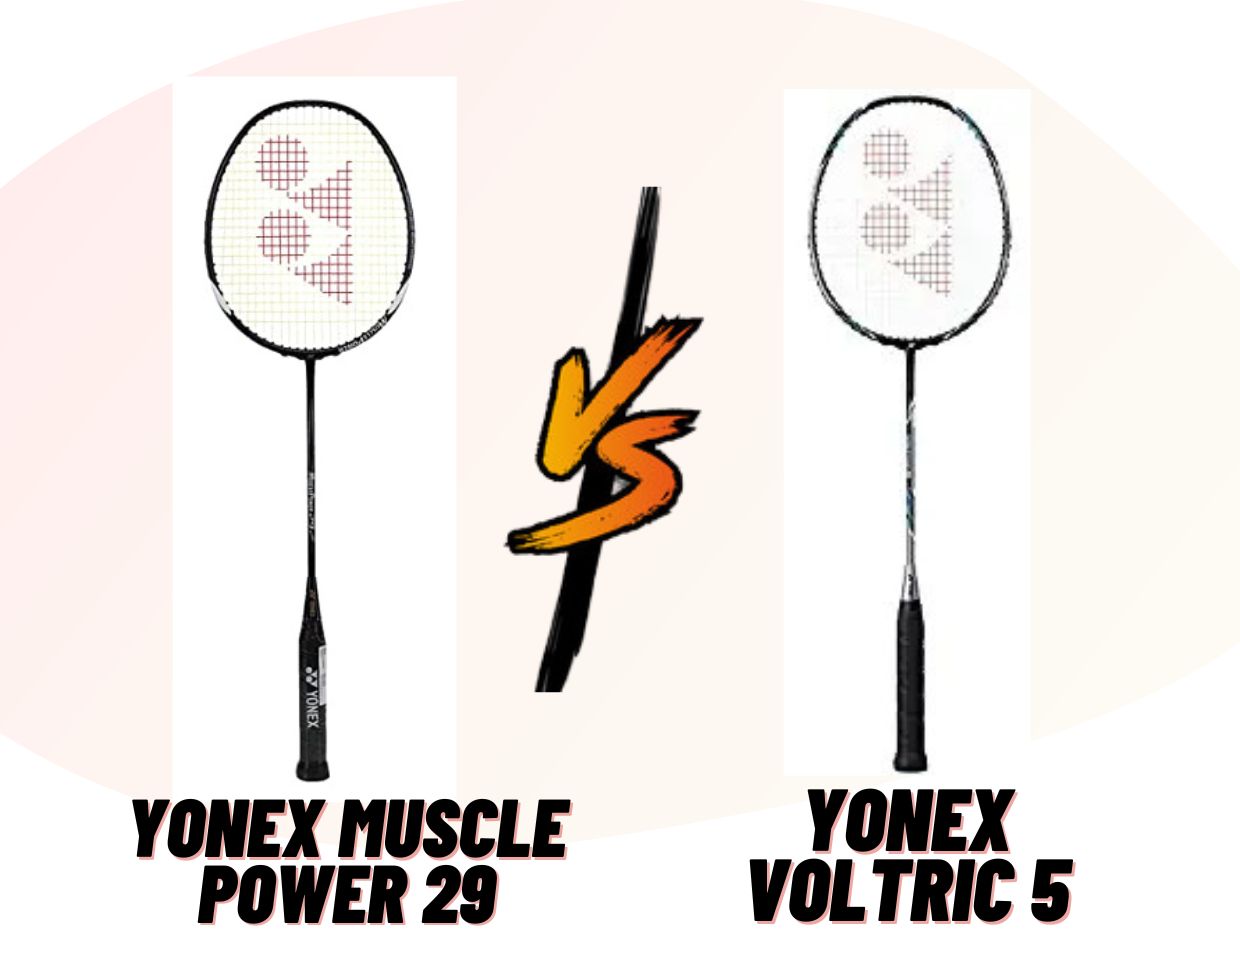 Yonex Muscle Power 29 vs Voltric 5 Badminton Rackets: Which One is Better?